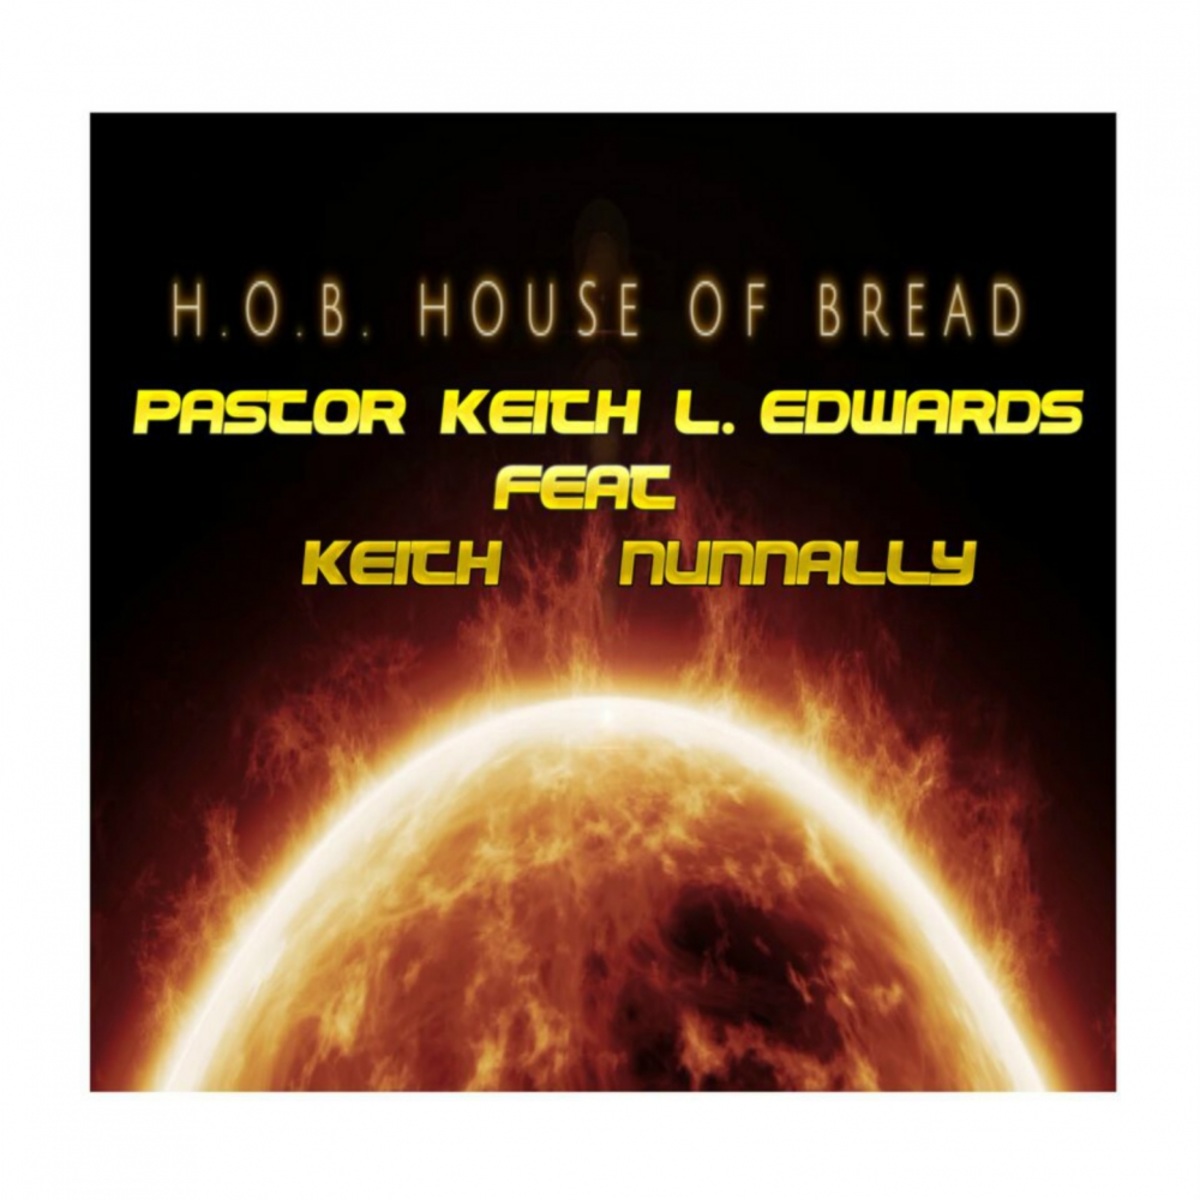 Pastor Keith L. Edwards - House Of Bread (Al 'Hot Mix' Holmes Stomp Mix) / Hot Mix Holmes Music